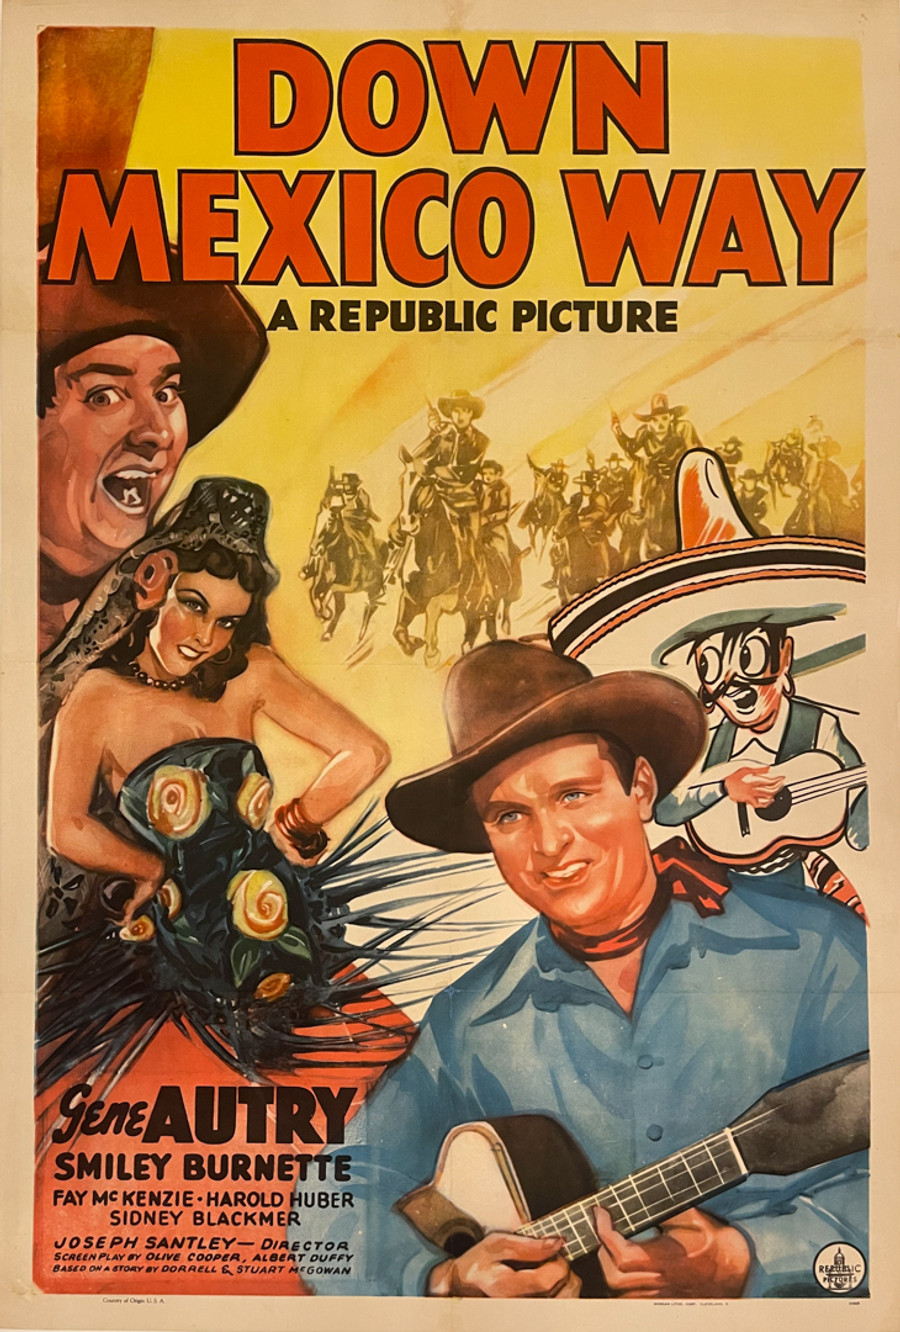 down Mexico way original movie poster features Gene Autrey and can can girl